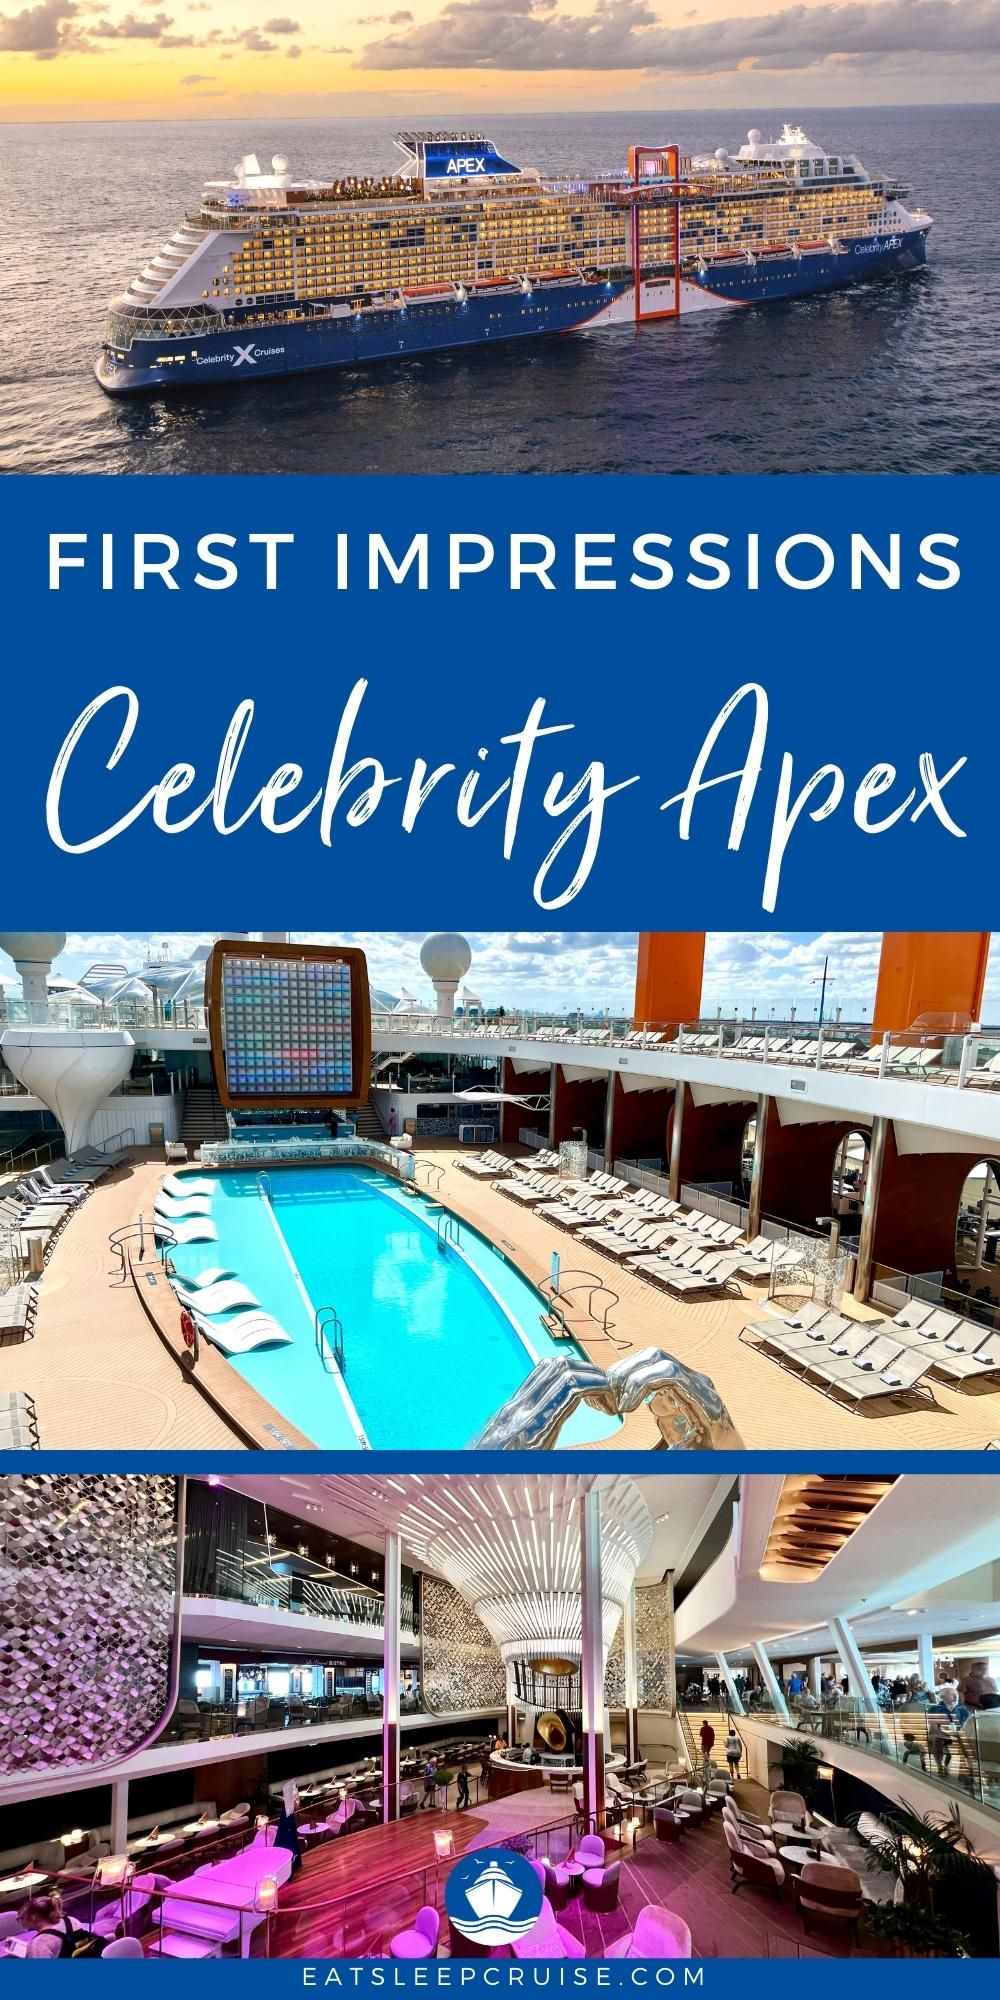 First Impressions Celebrity Apex